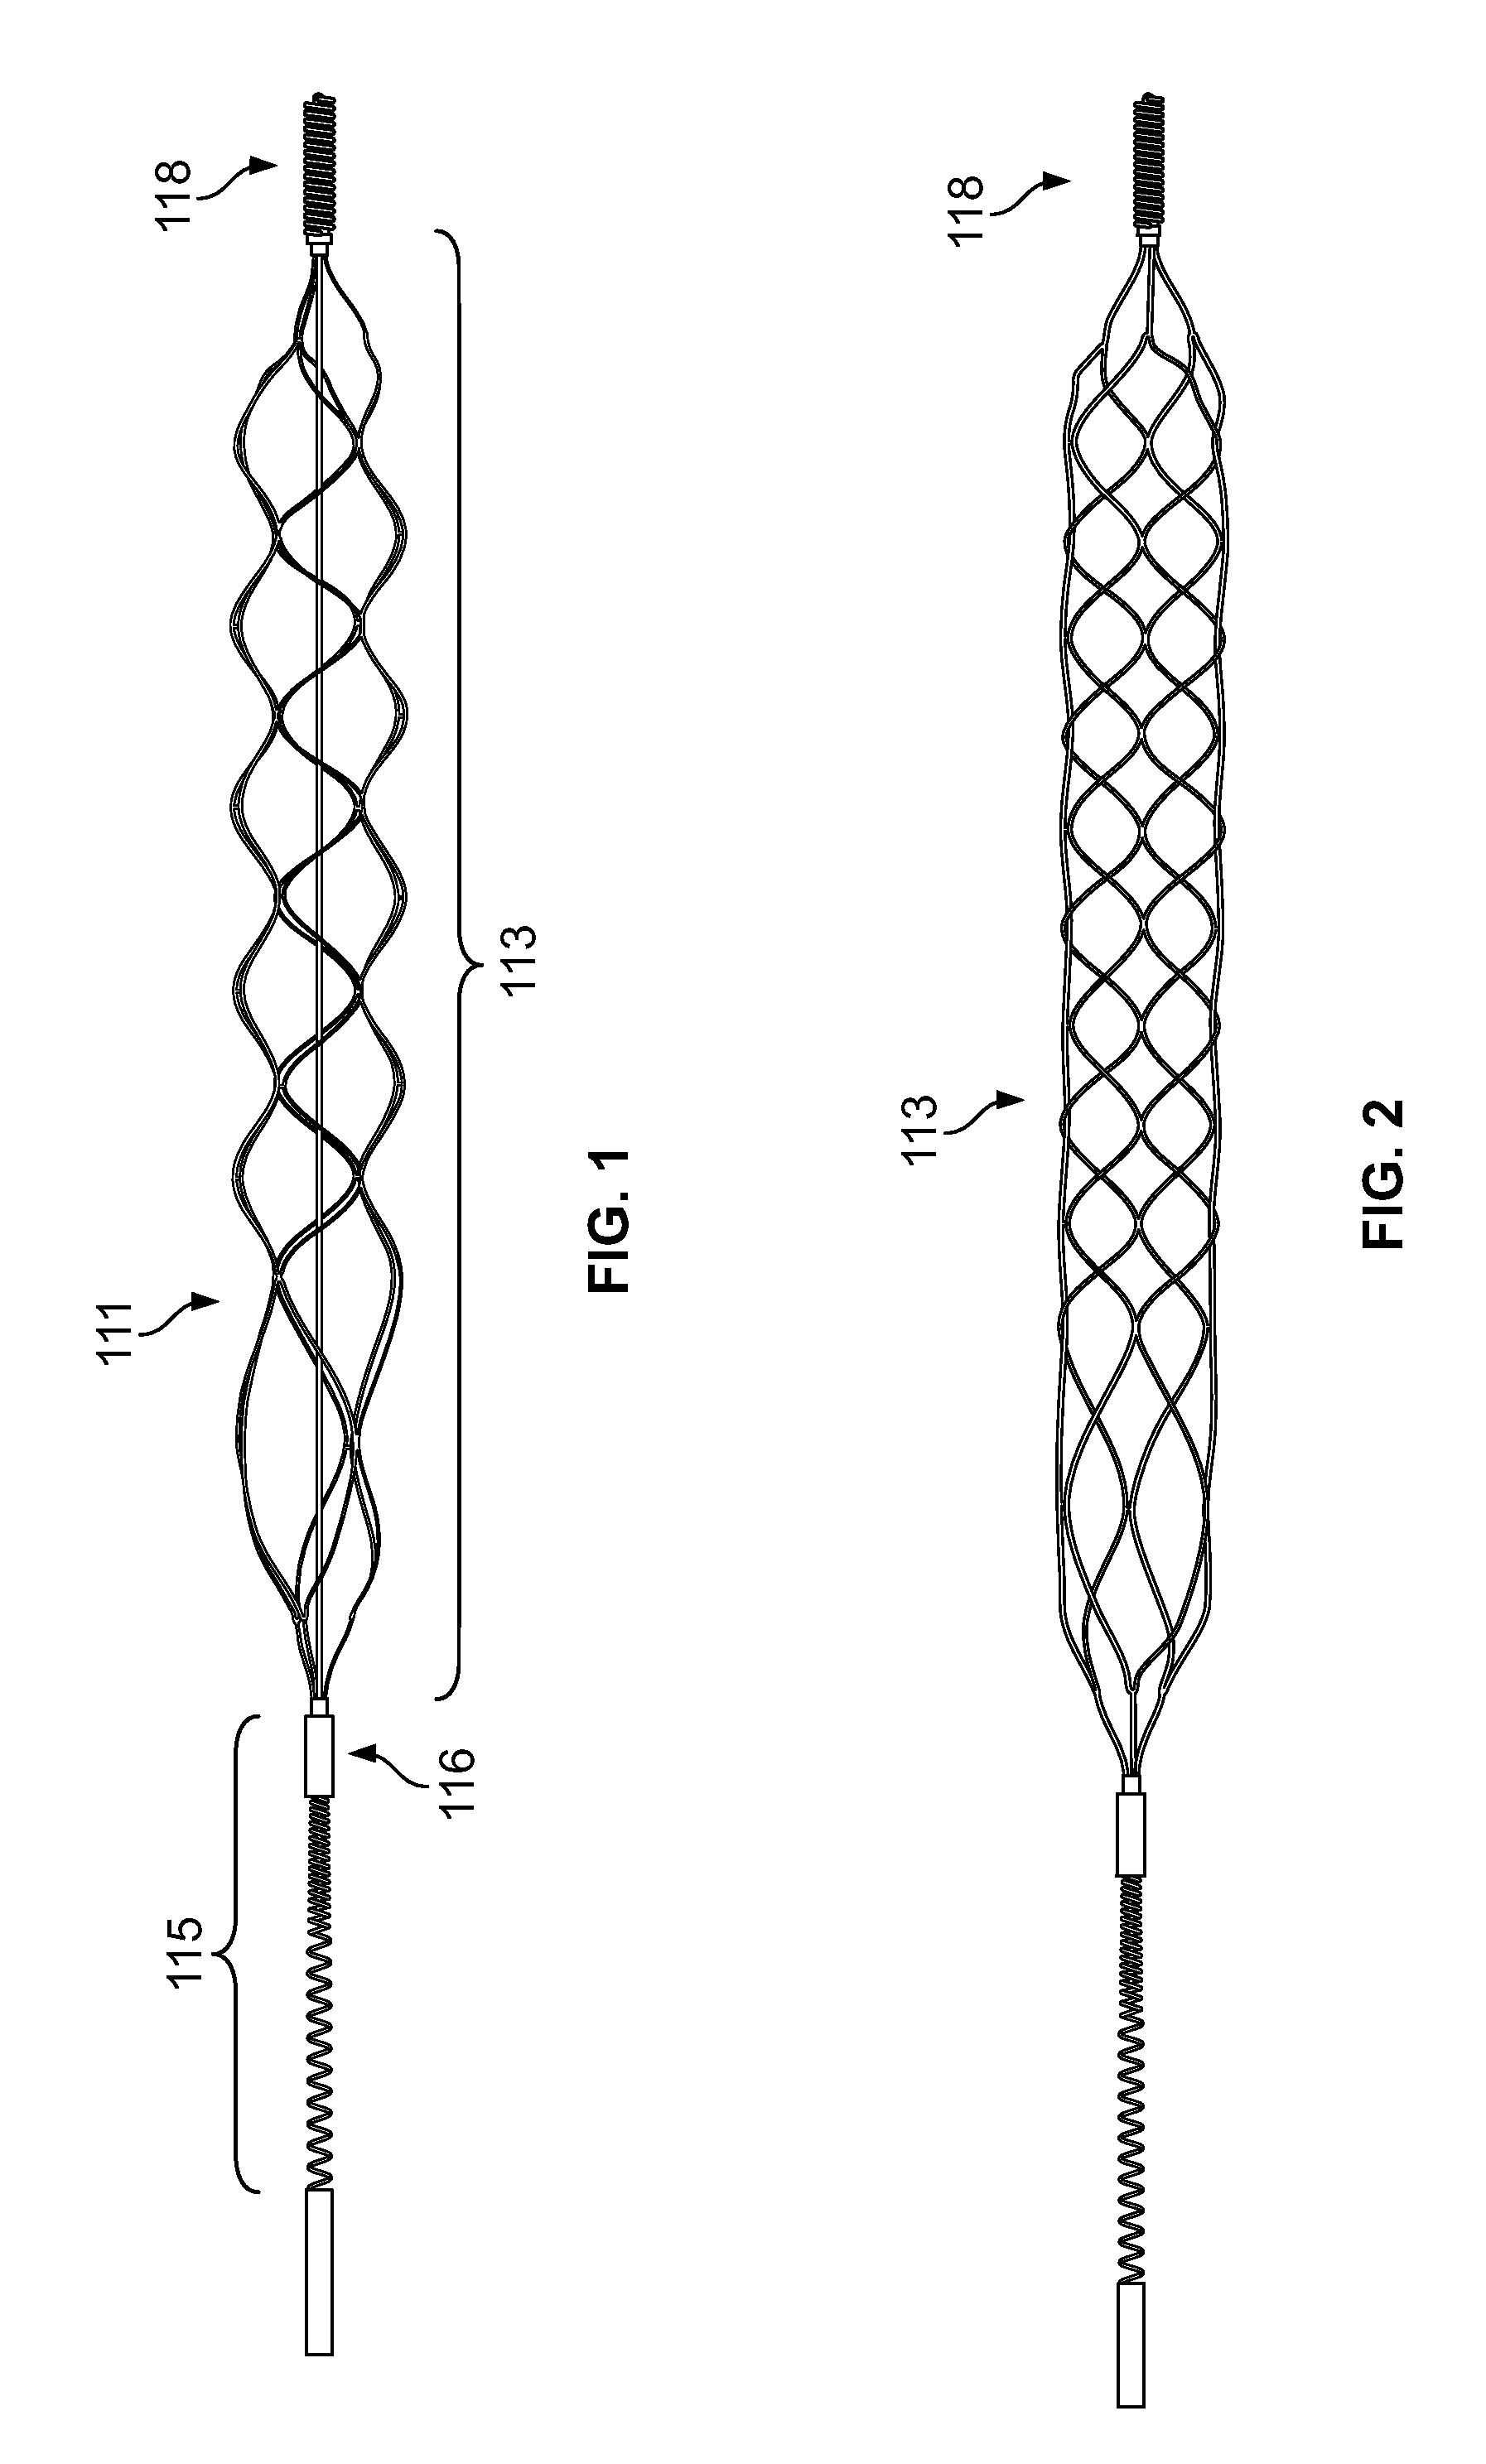 Design and methods for a device with blood flow restriction feature for embolus removal in human vasculature